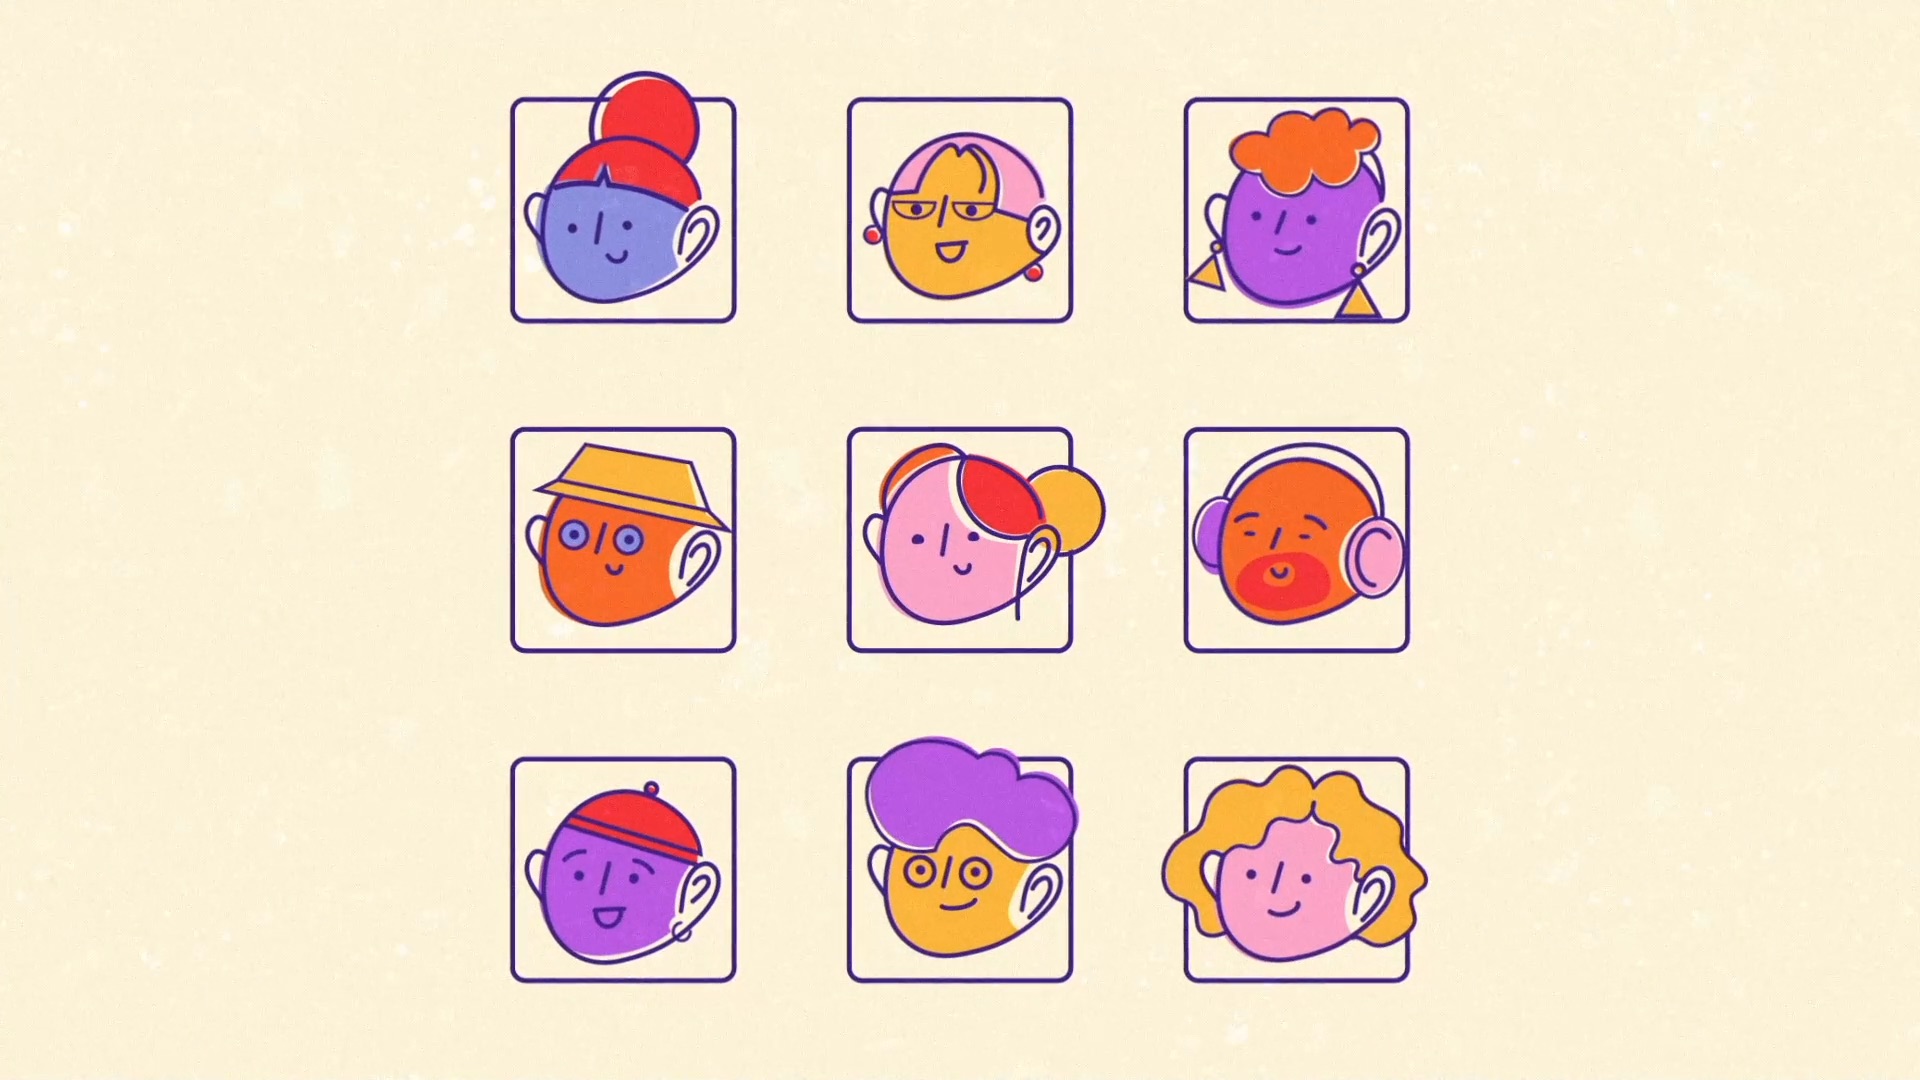 An illustration of 9 happy and diverse people.